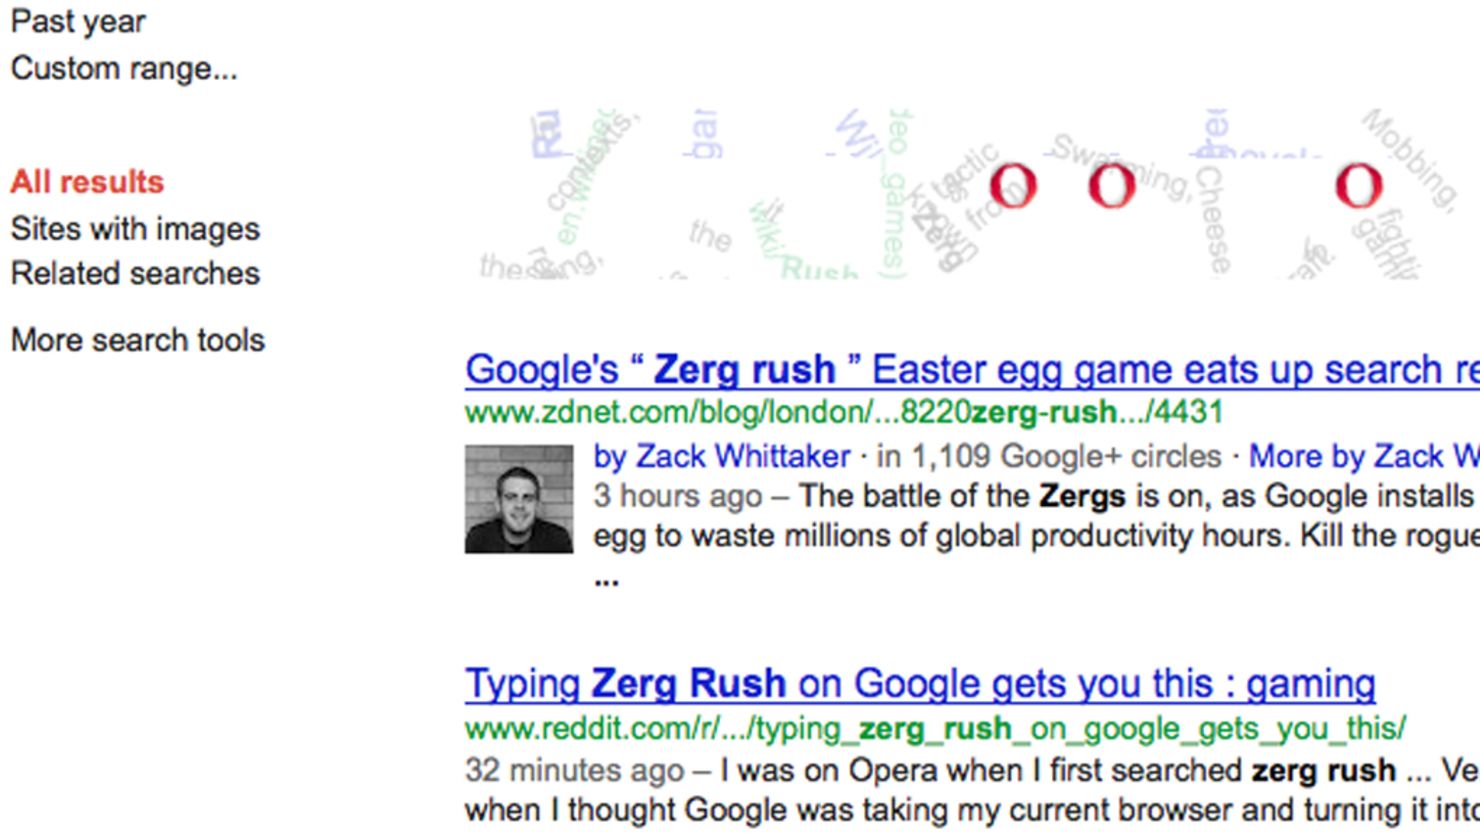 The "O's" from the Google image become swarming "zerglings" after a search for the gaming term "Zerg rush."